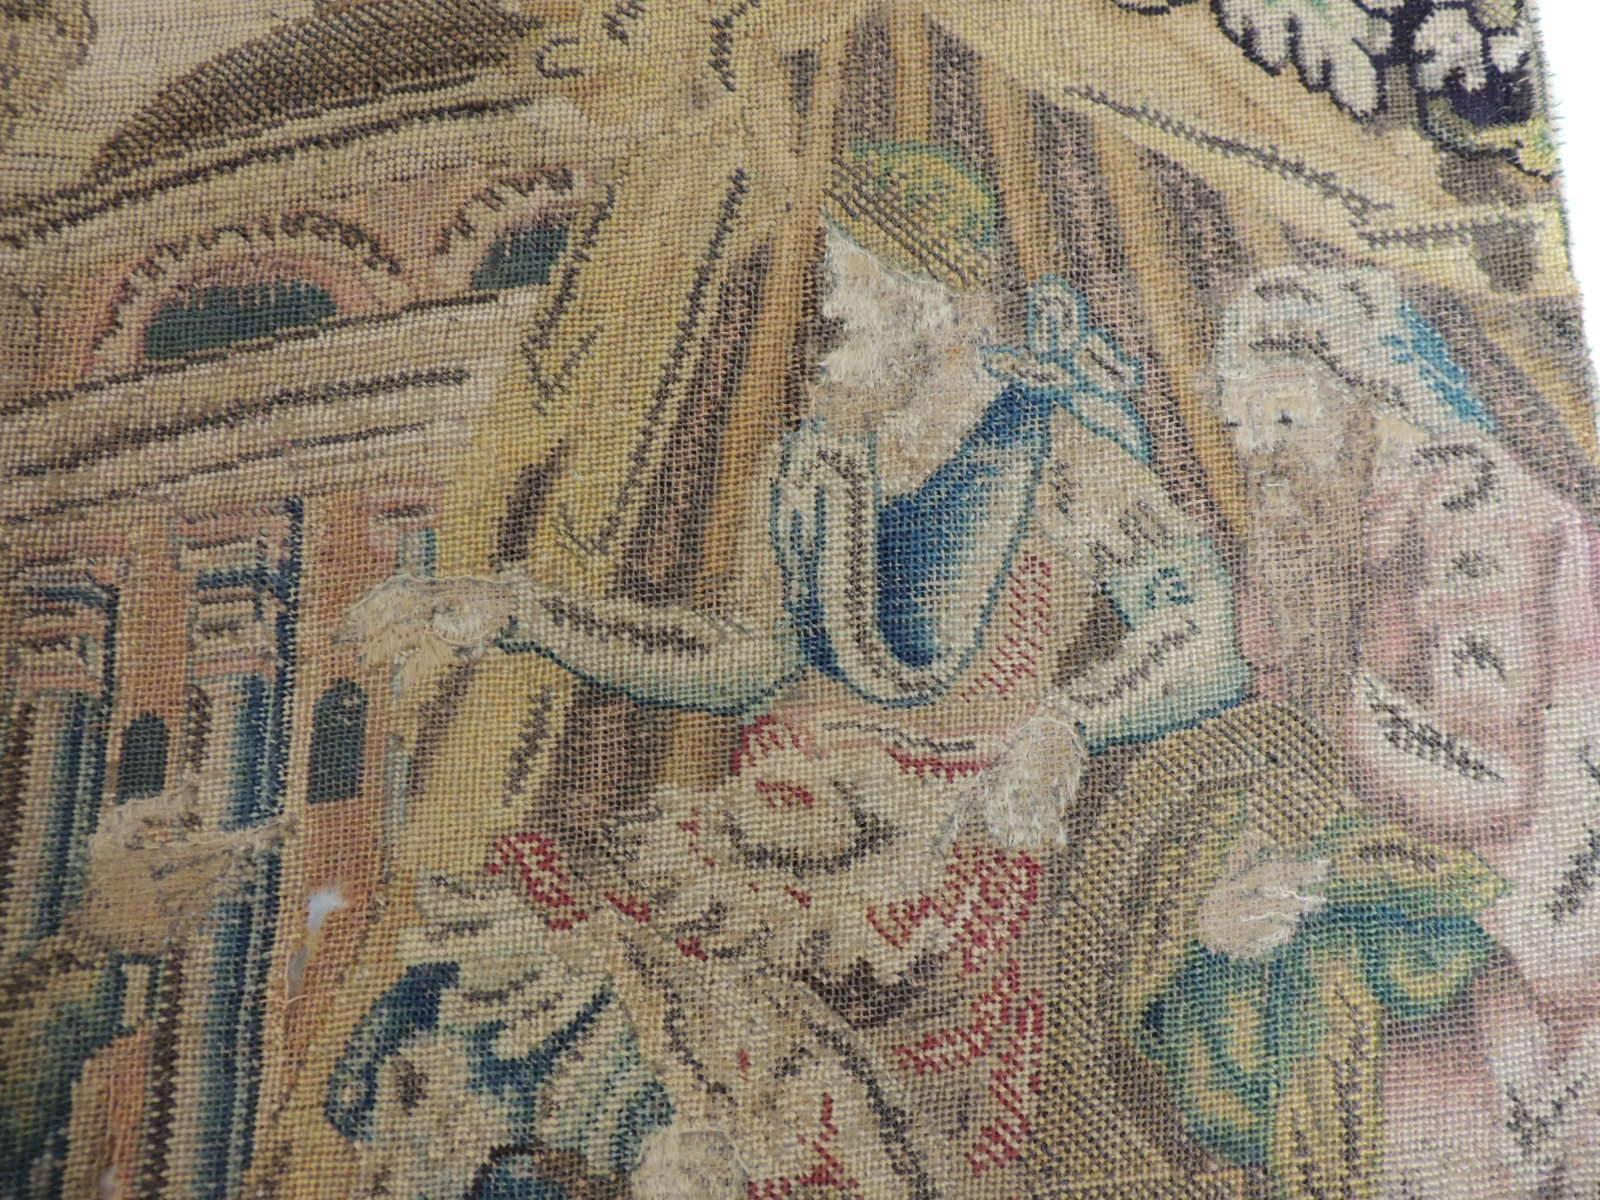 18th century embroidery